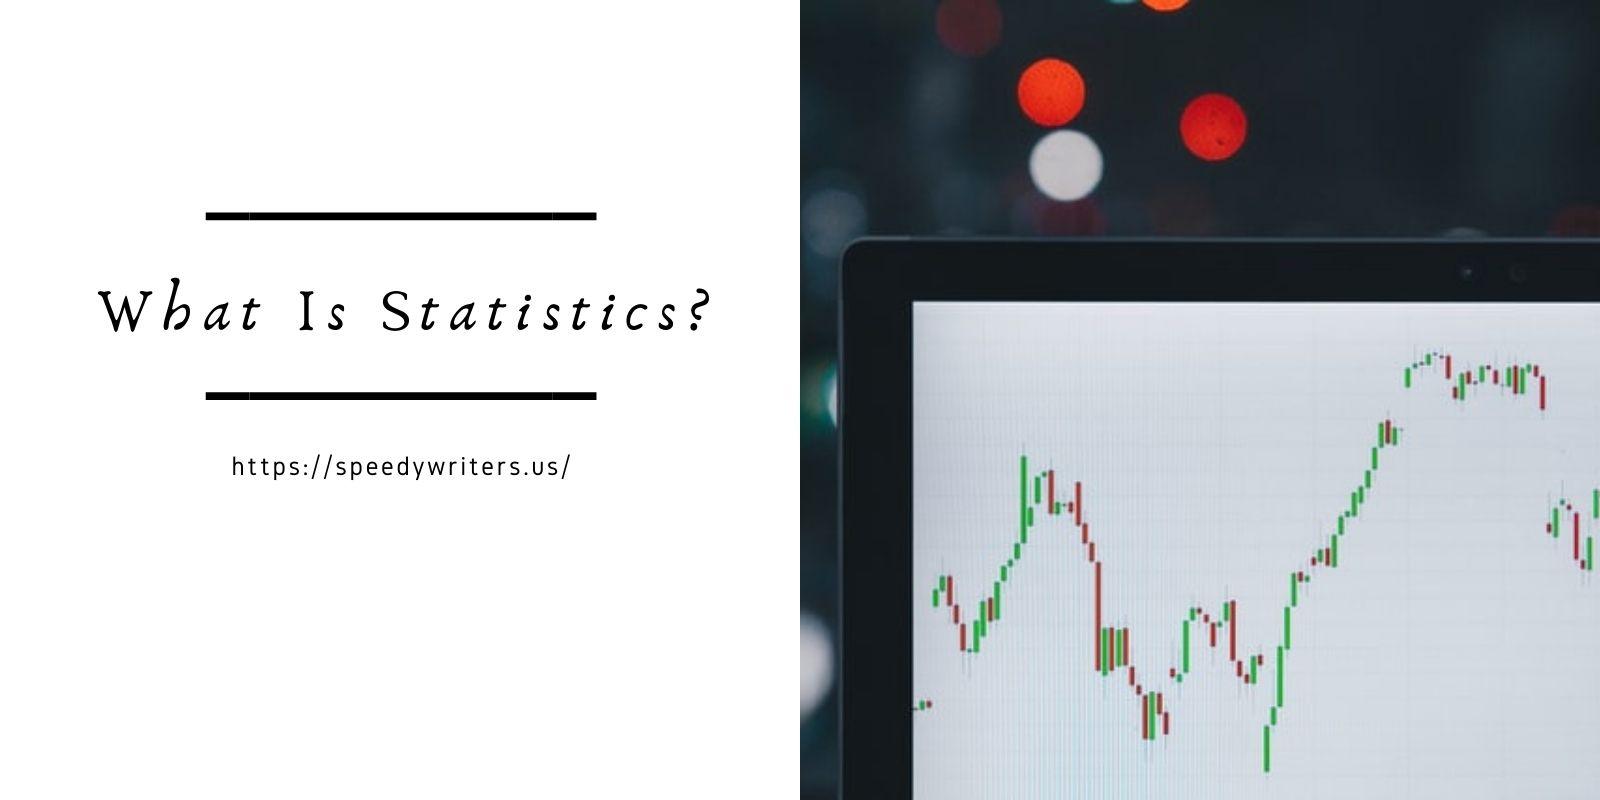 What Is Statistics?